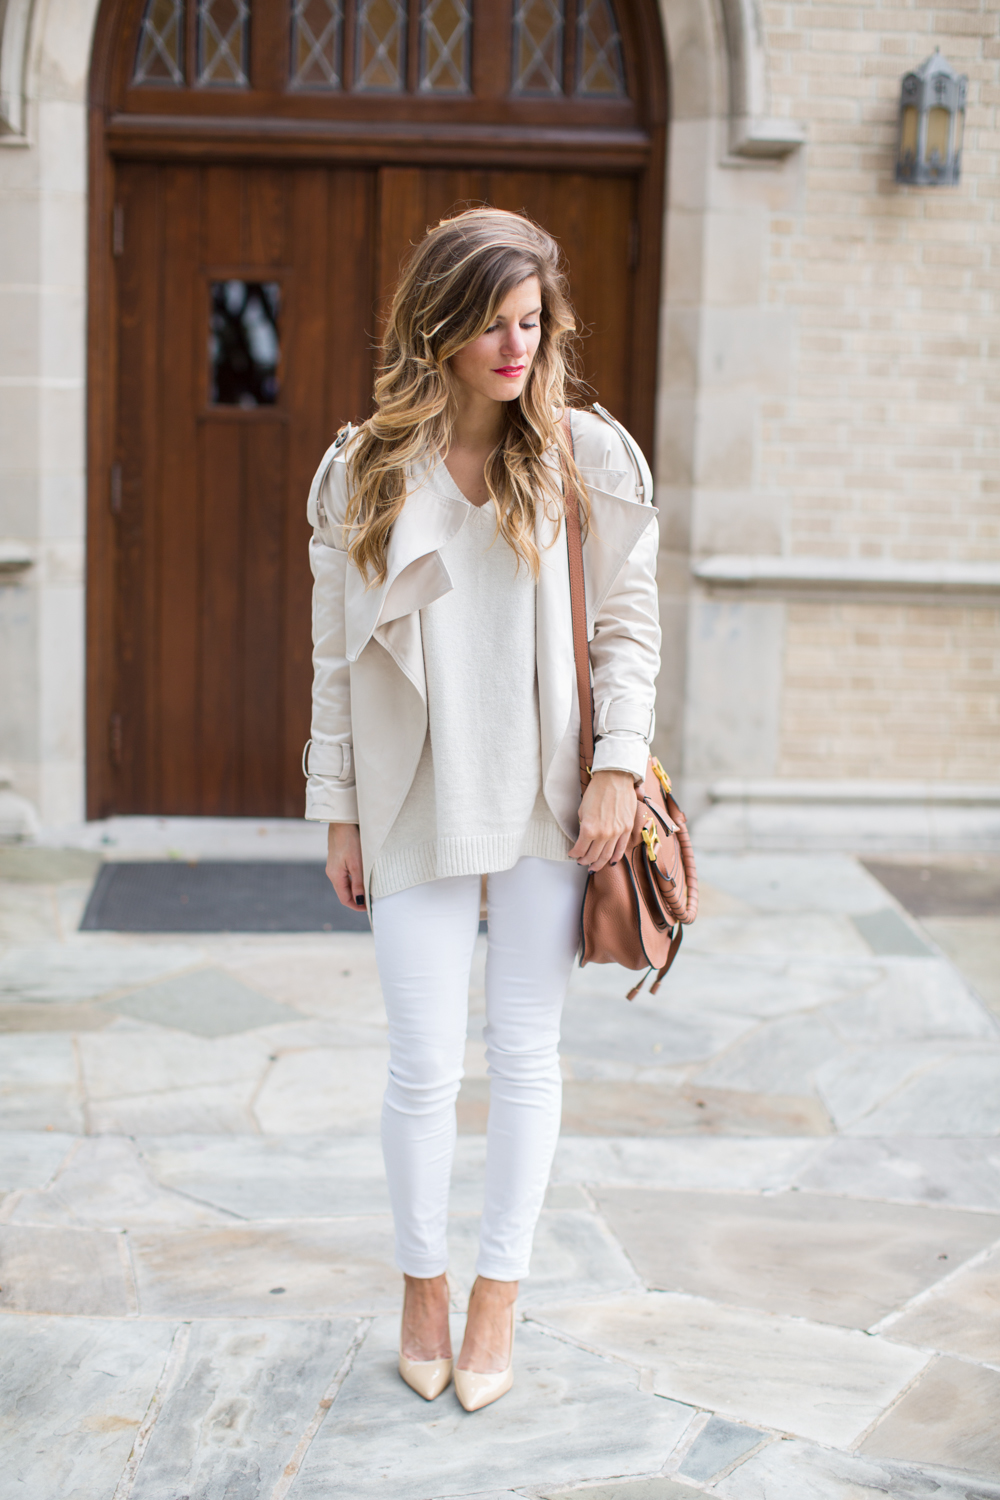 Wearing Winter White - Winter white outfit with complementary